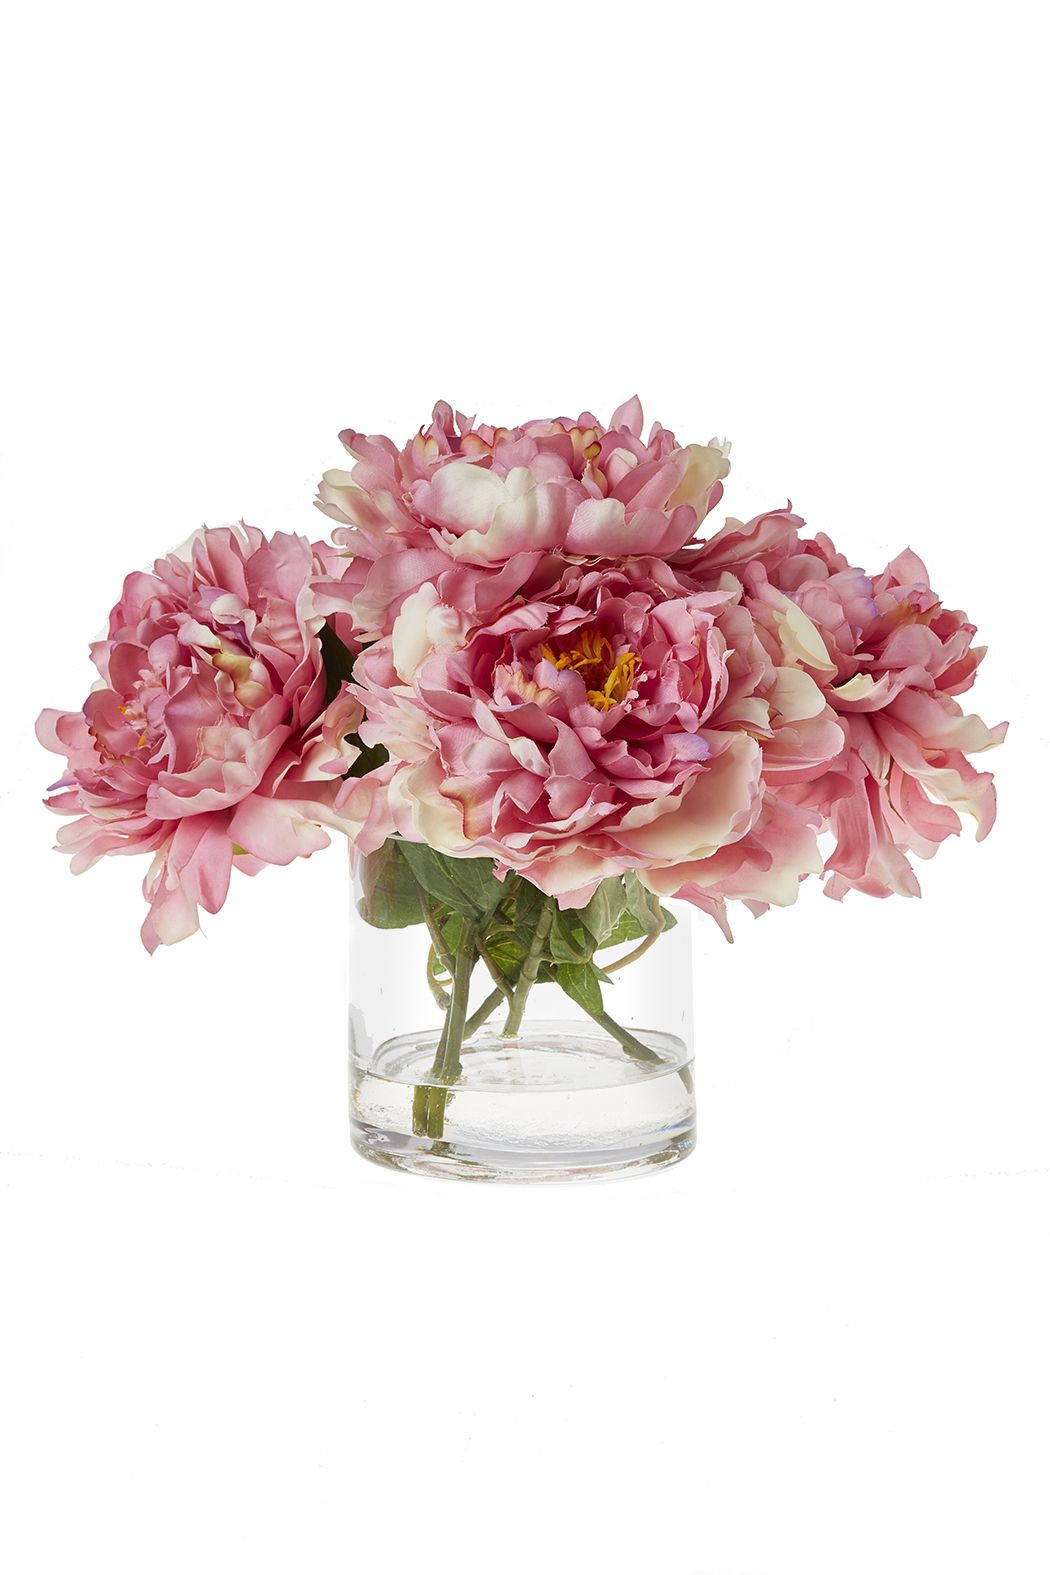 21 Fantastic Silk Peonies In Vase 2024 free download silk peonies in vase of eurica peonies in water pinterest peony and boutique pertaining to five peonies in a clear glass square container approx measures 12 h x 11 w peonies in water by euri